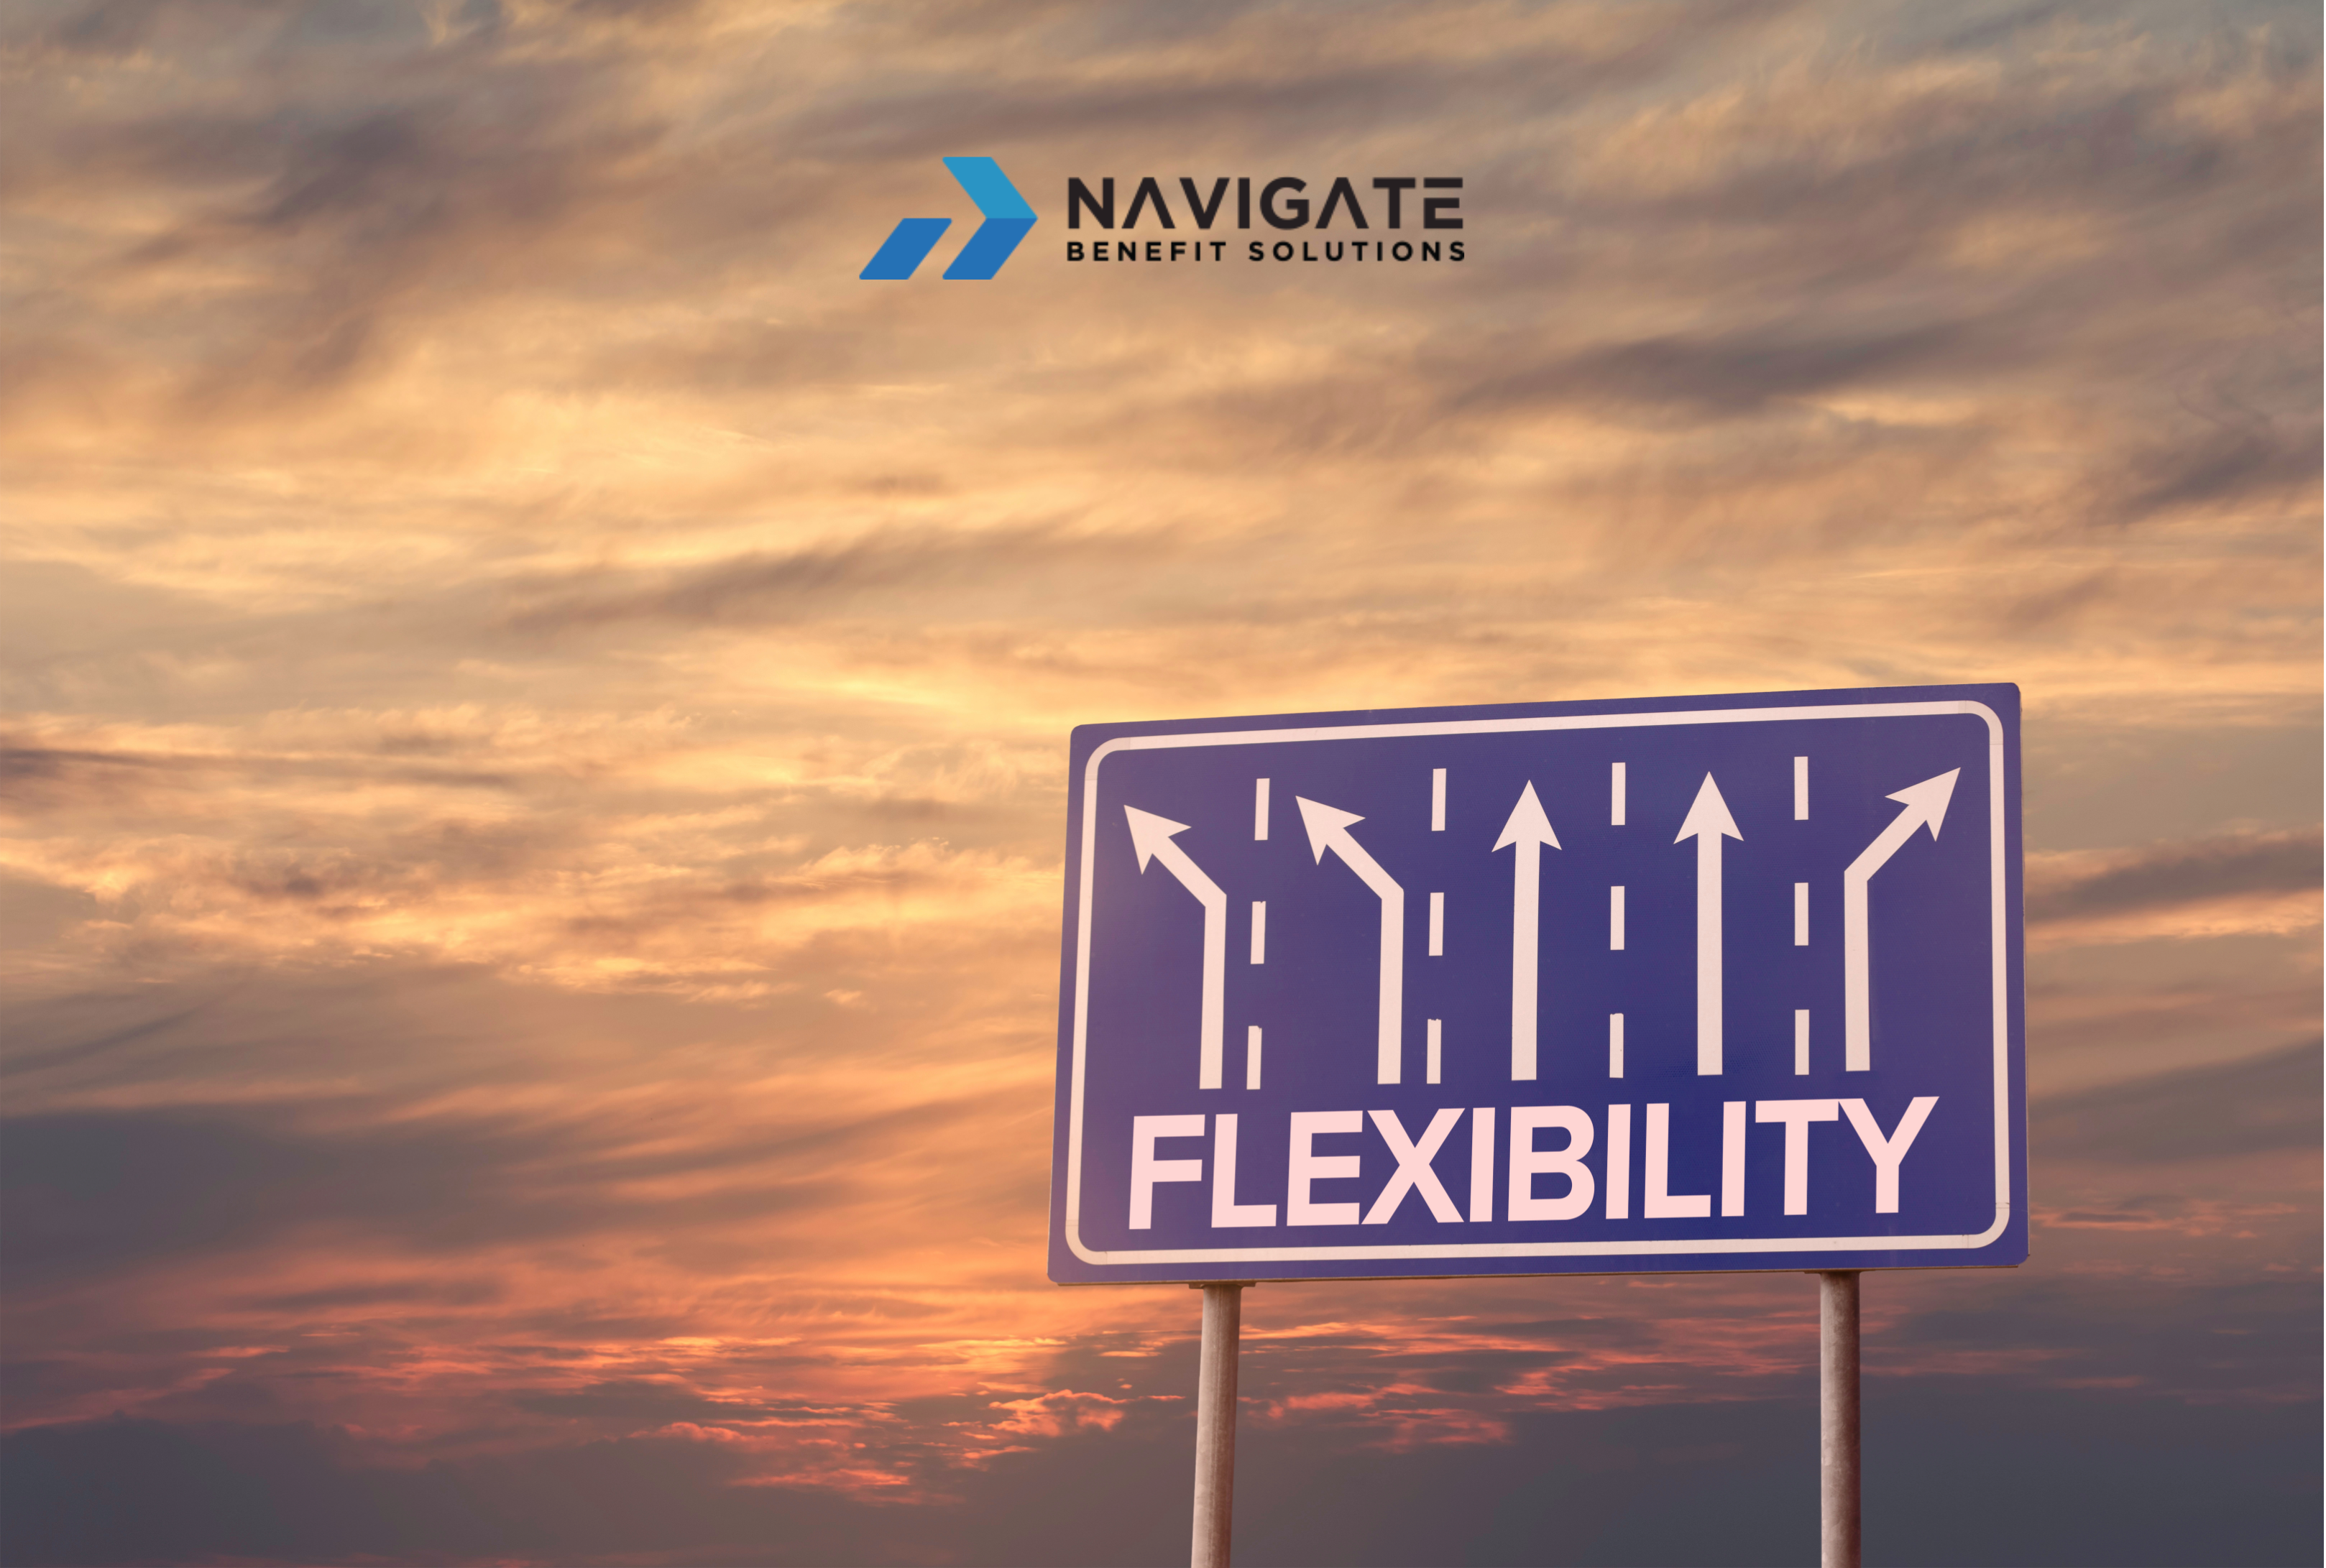 An illustrative road sign displaying the word 'flexibility' with arrows pointing in multiple directions, symbolizing the diverse choices and customization options of flexible benefits for employees.